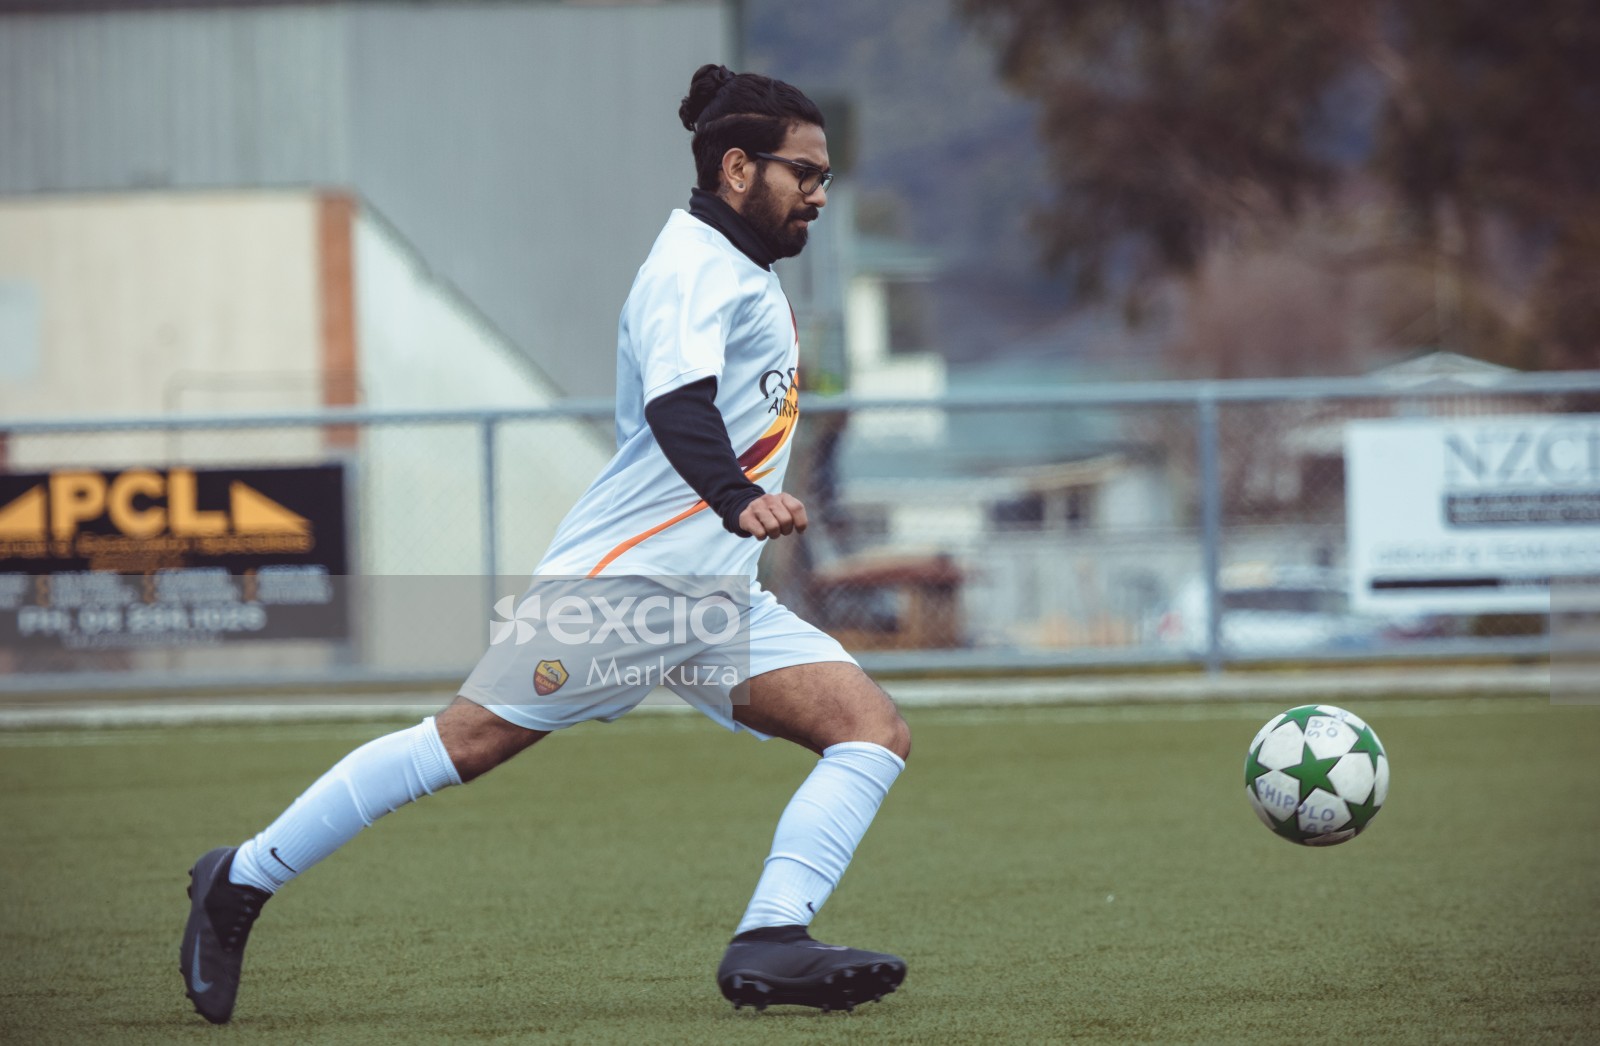 Guy in glasses and man bun running after the ball - Sports Zone sunday league